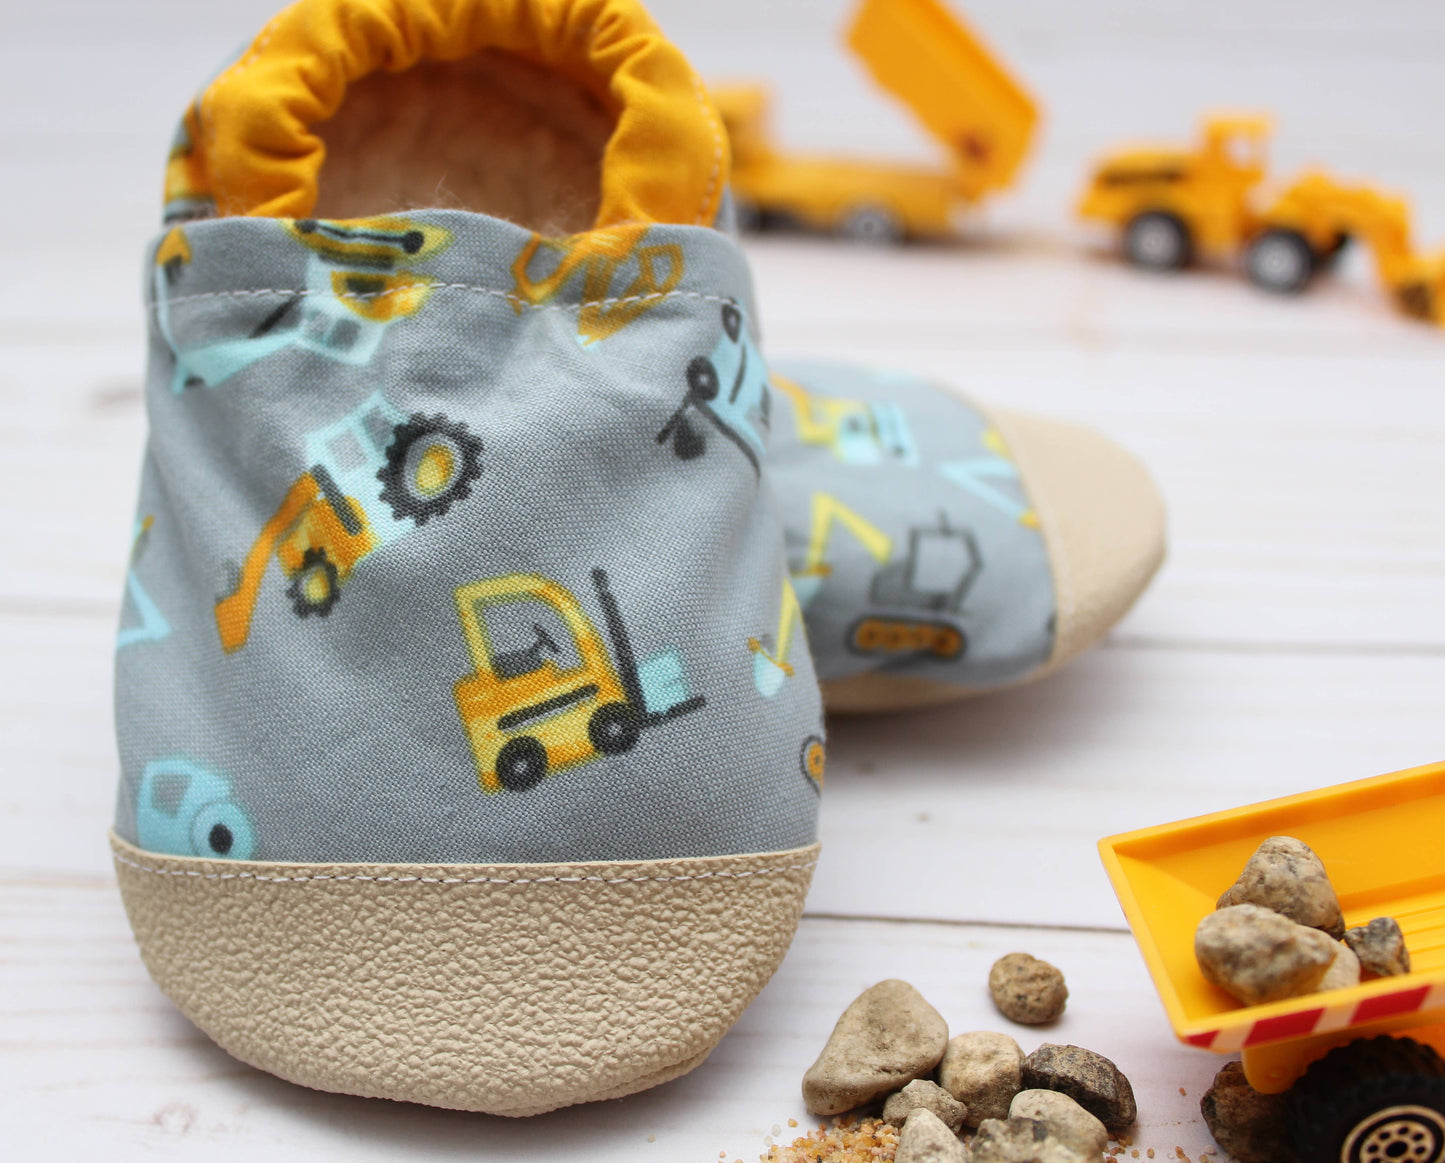 Construction Vehicles Baby Shoes